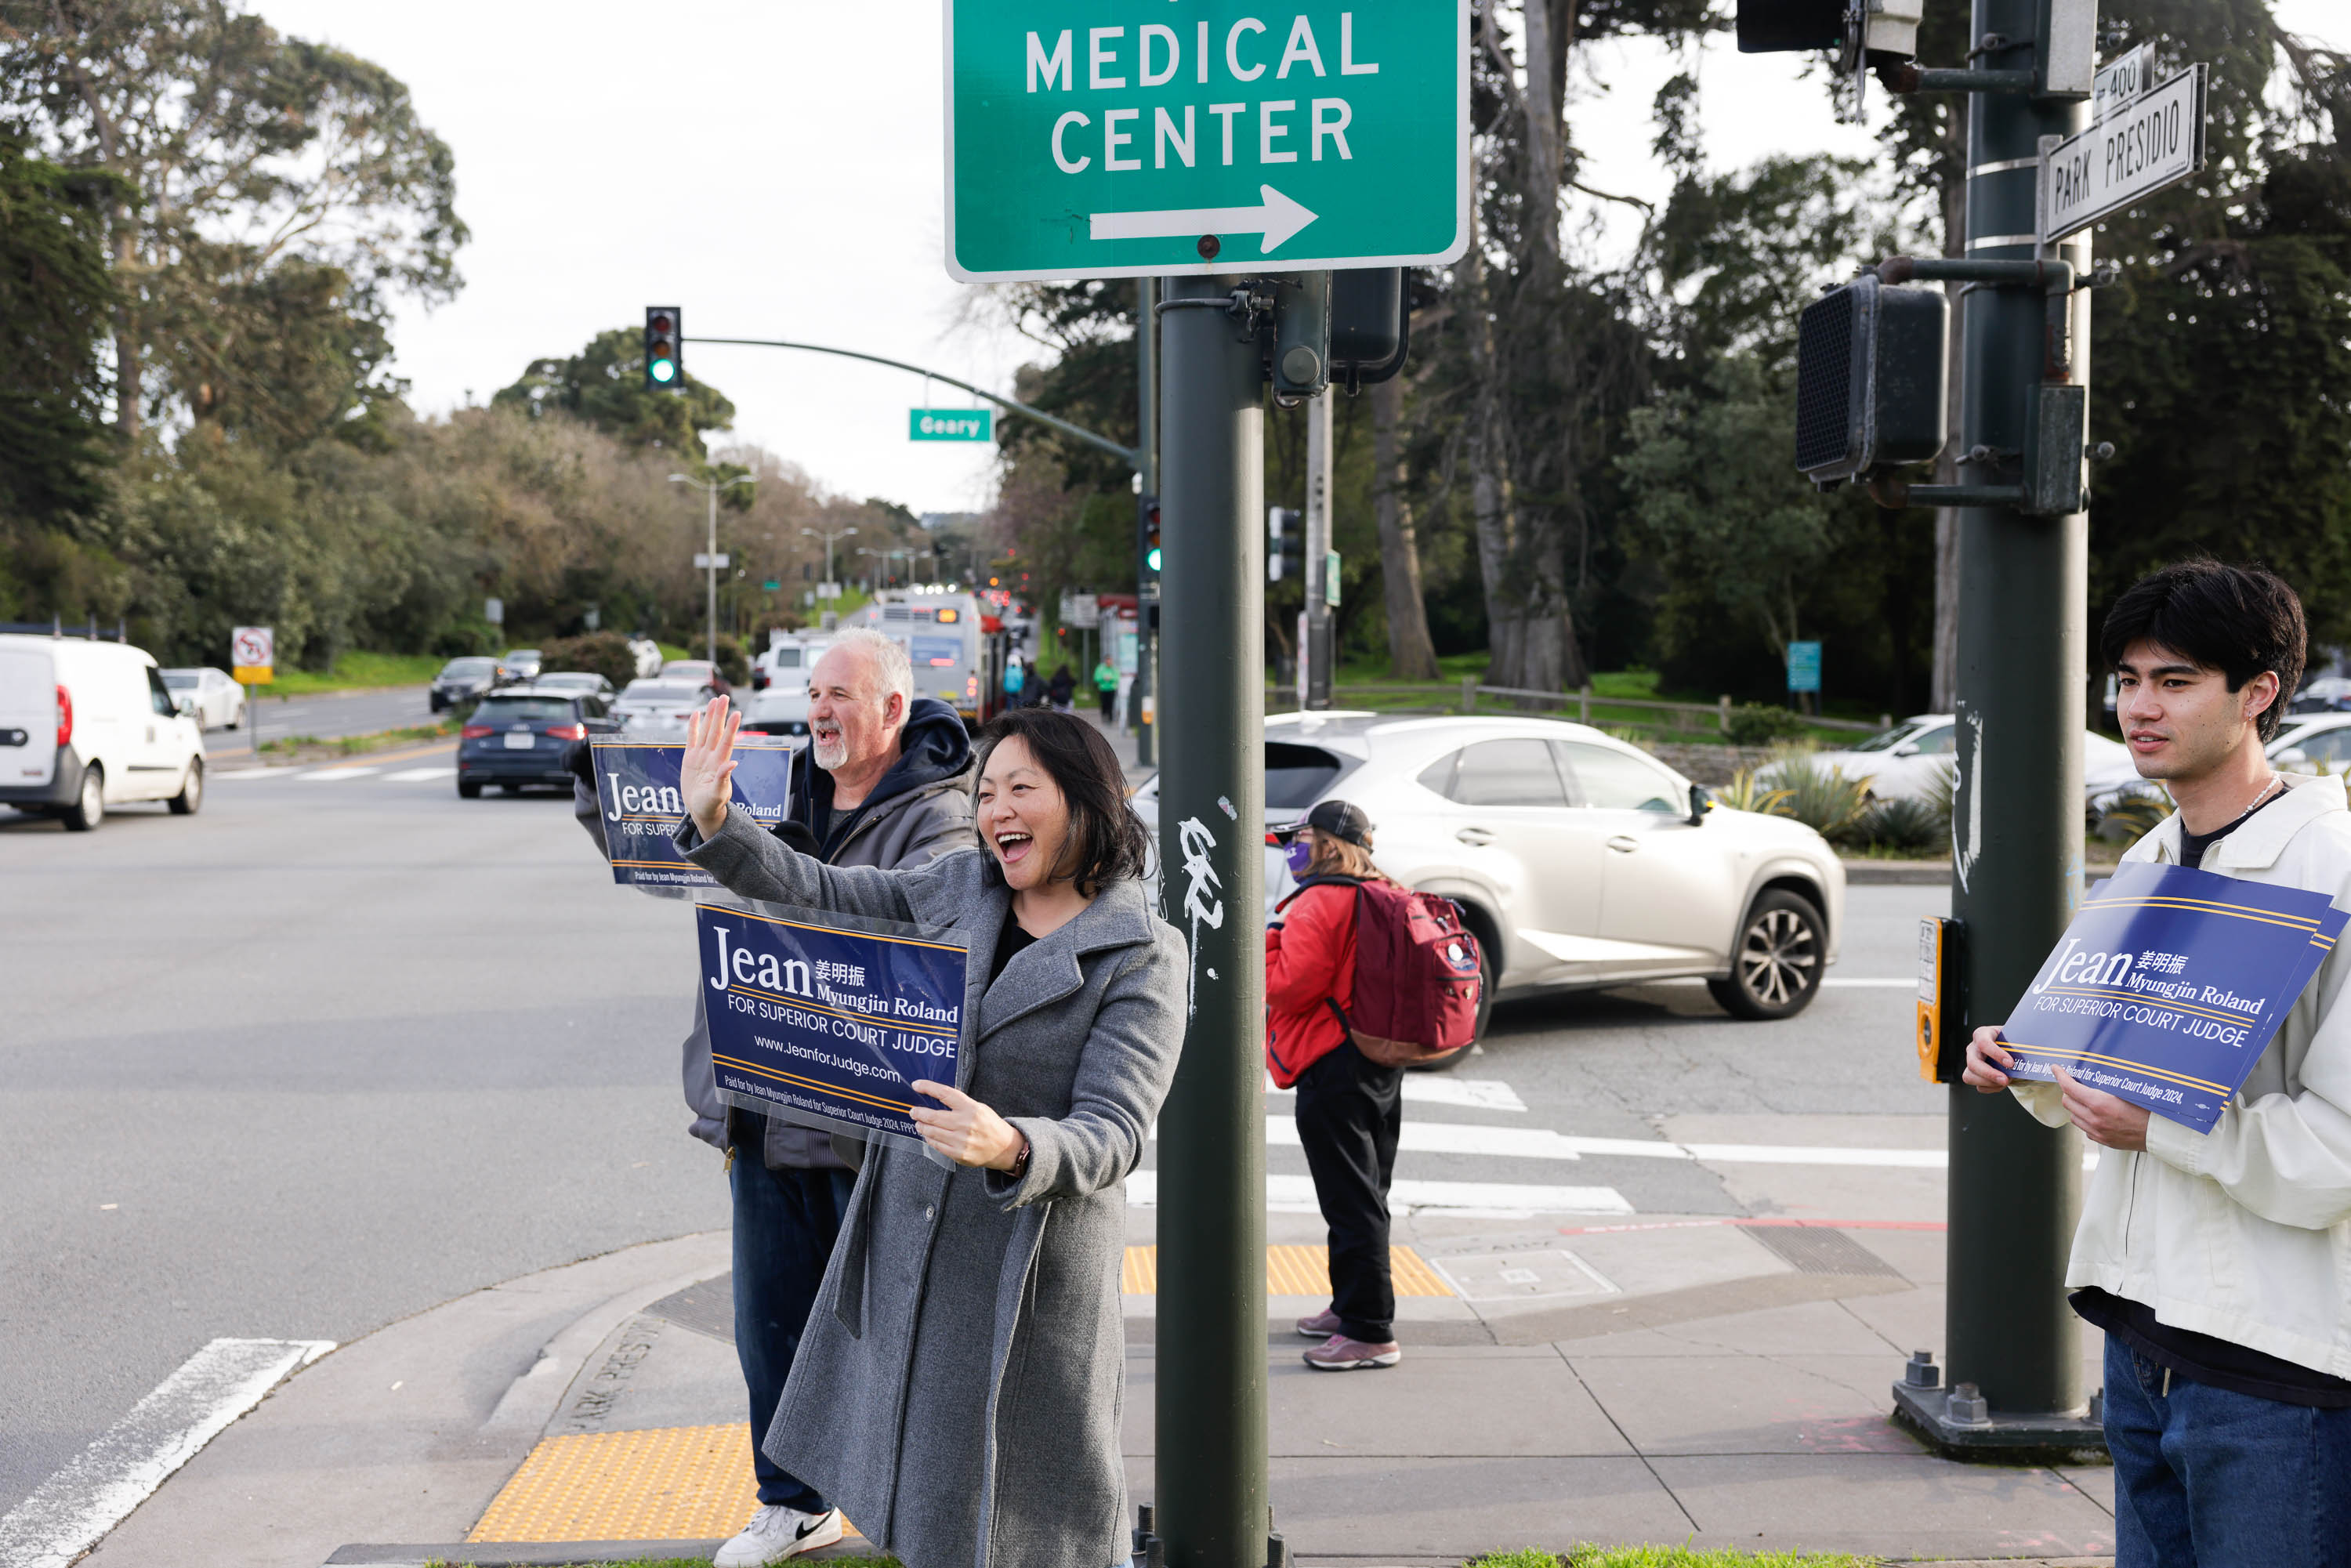 Three people campaign at a street corner near a &quot;Medical Center&quot; sign, holding election signs for a judicial candidate.